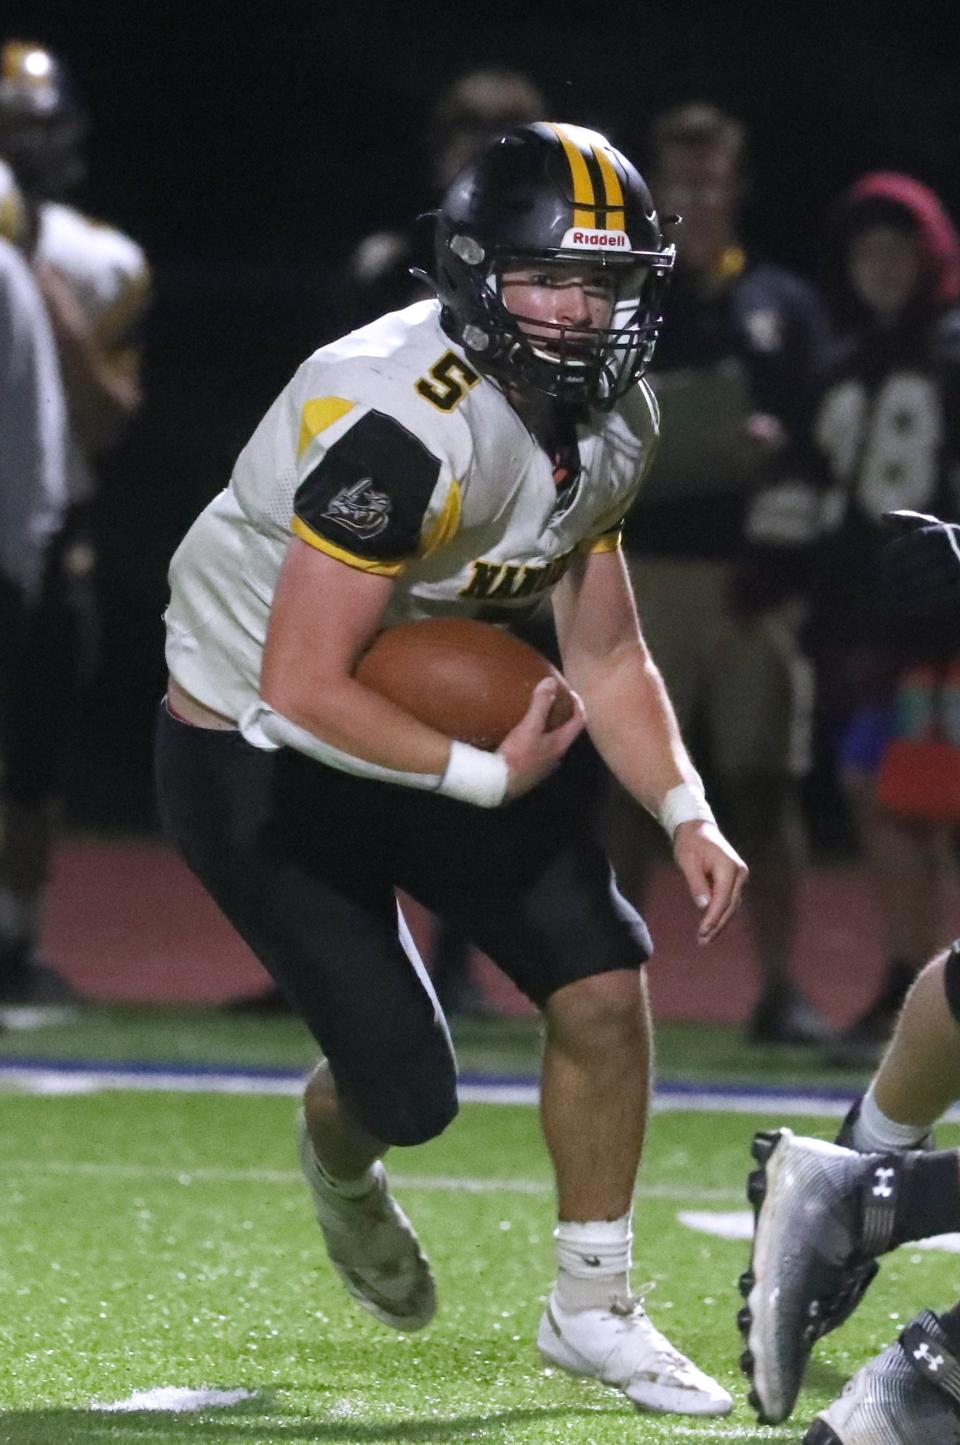 Nanuet's James Moran carries the ball during the Little Brown Jug game at Pearl River Oct. 7, 2022. Nanuet won 31-7.